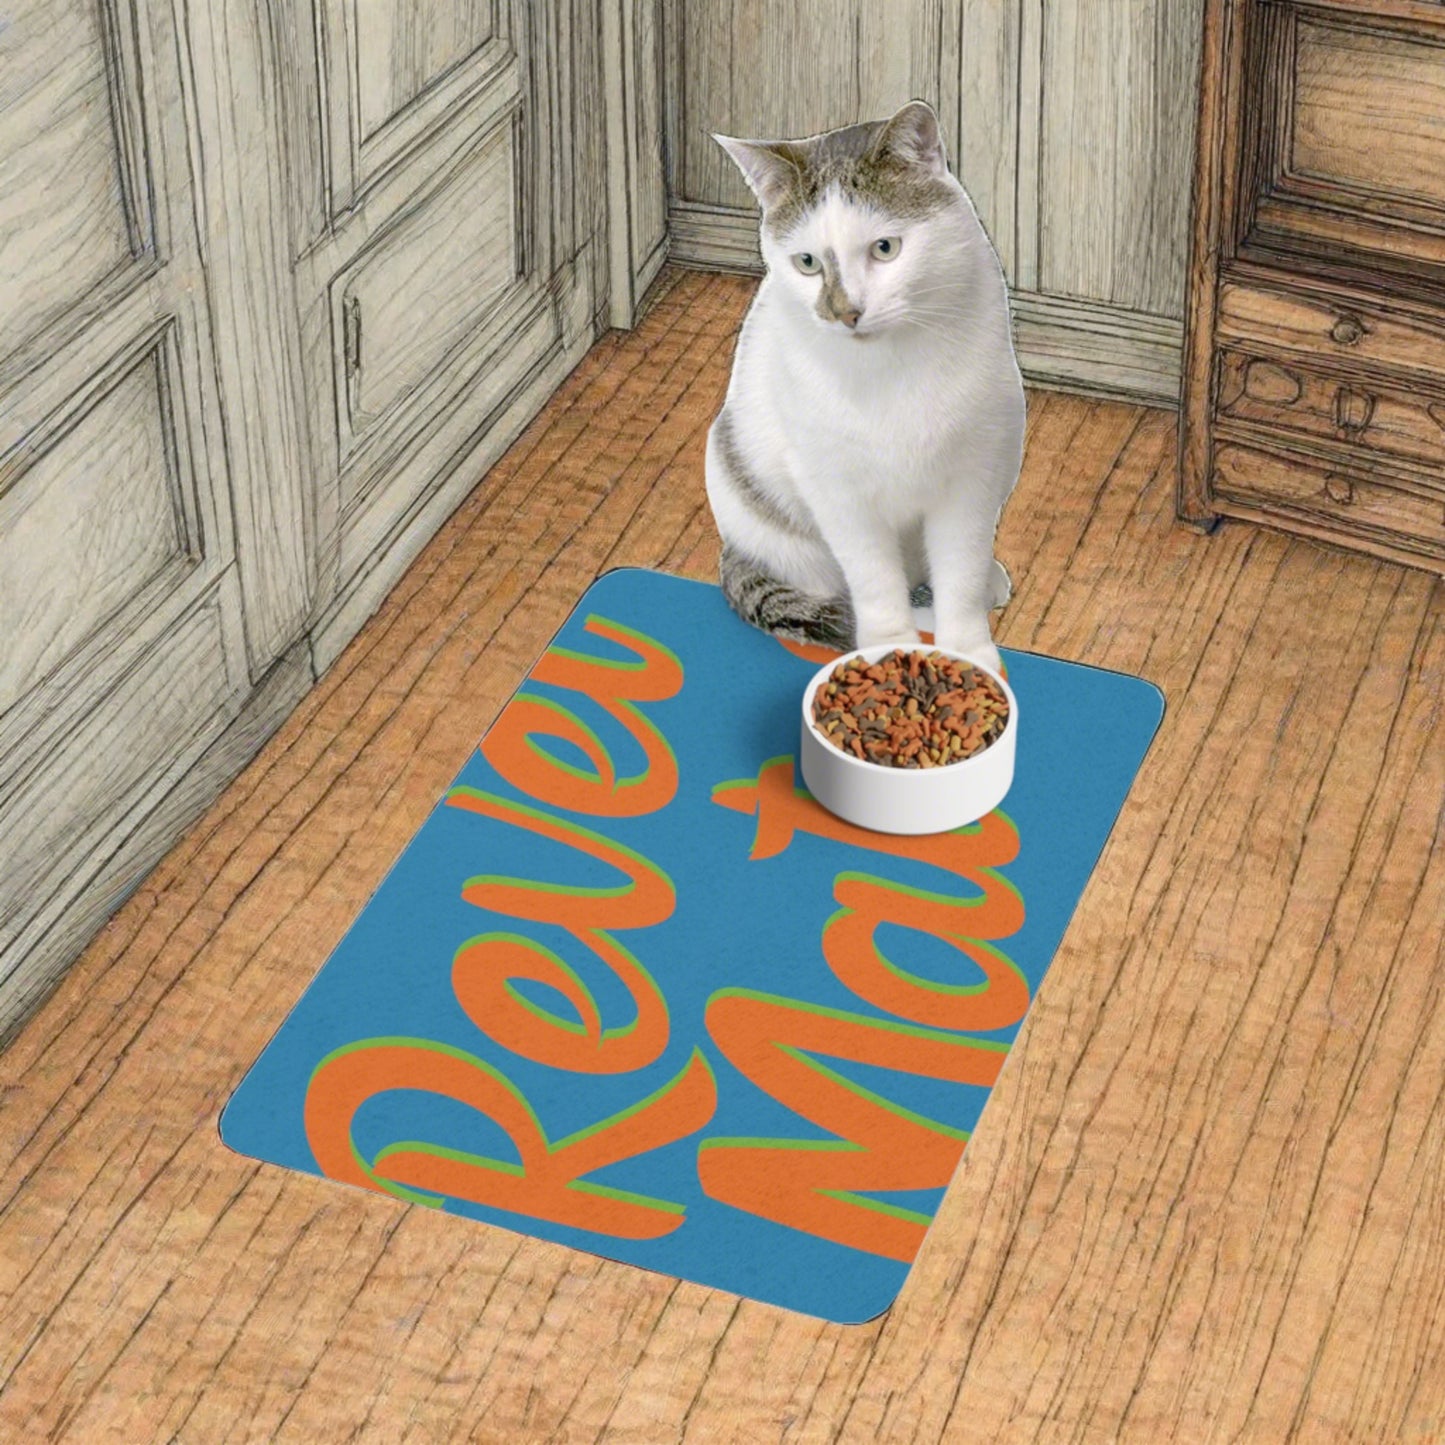 Pet Food Mat (12"x18") | for Dogs, Cats and all beloved Pets | Blue & Orange RevelMates Design